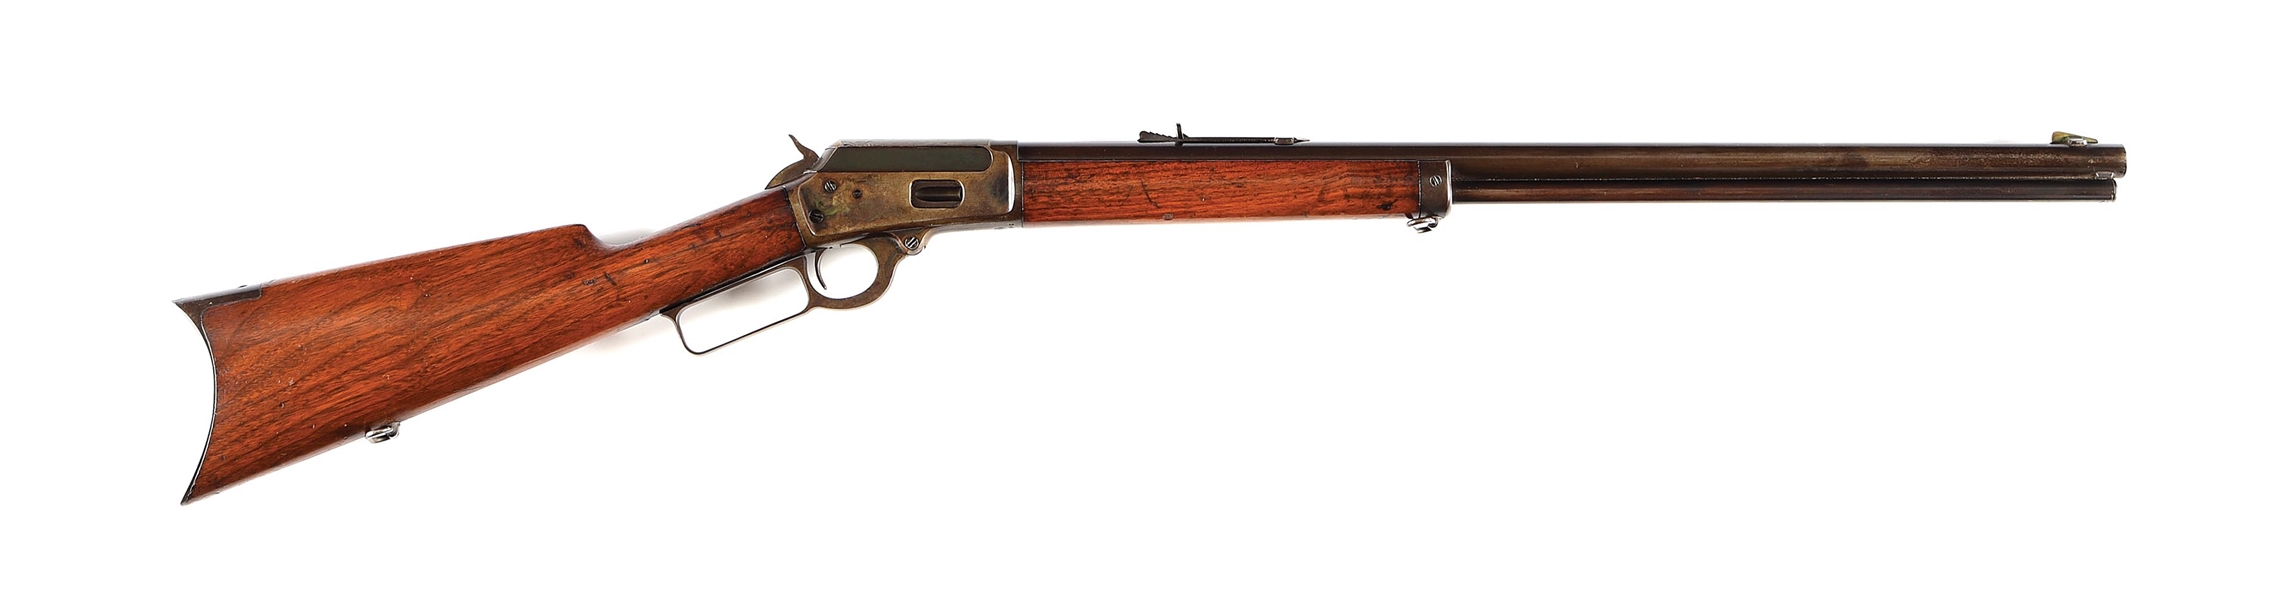 (C) MARLIN MODEL 1894 LEVER ACTION RIFLE (1902).